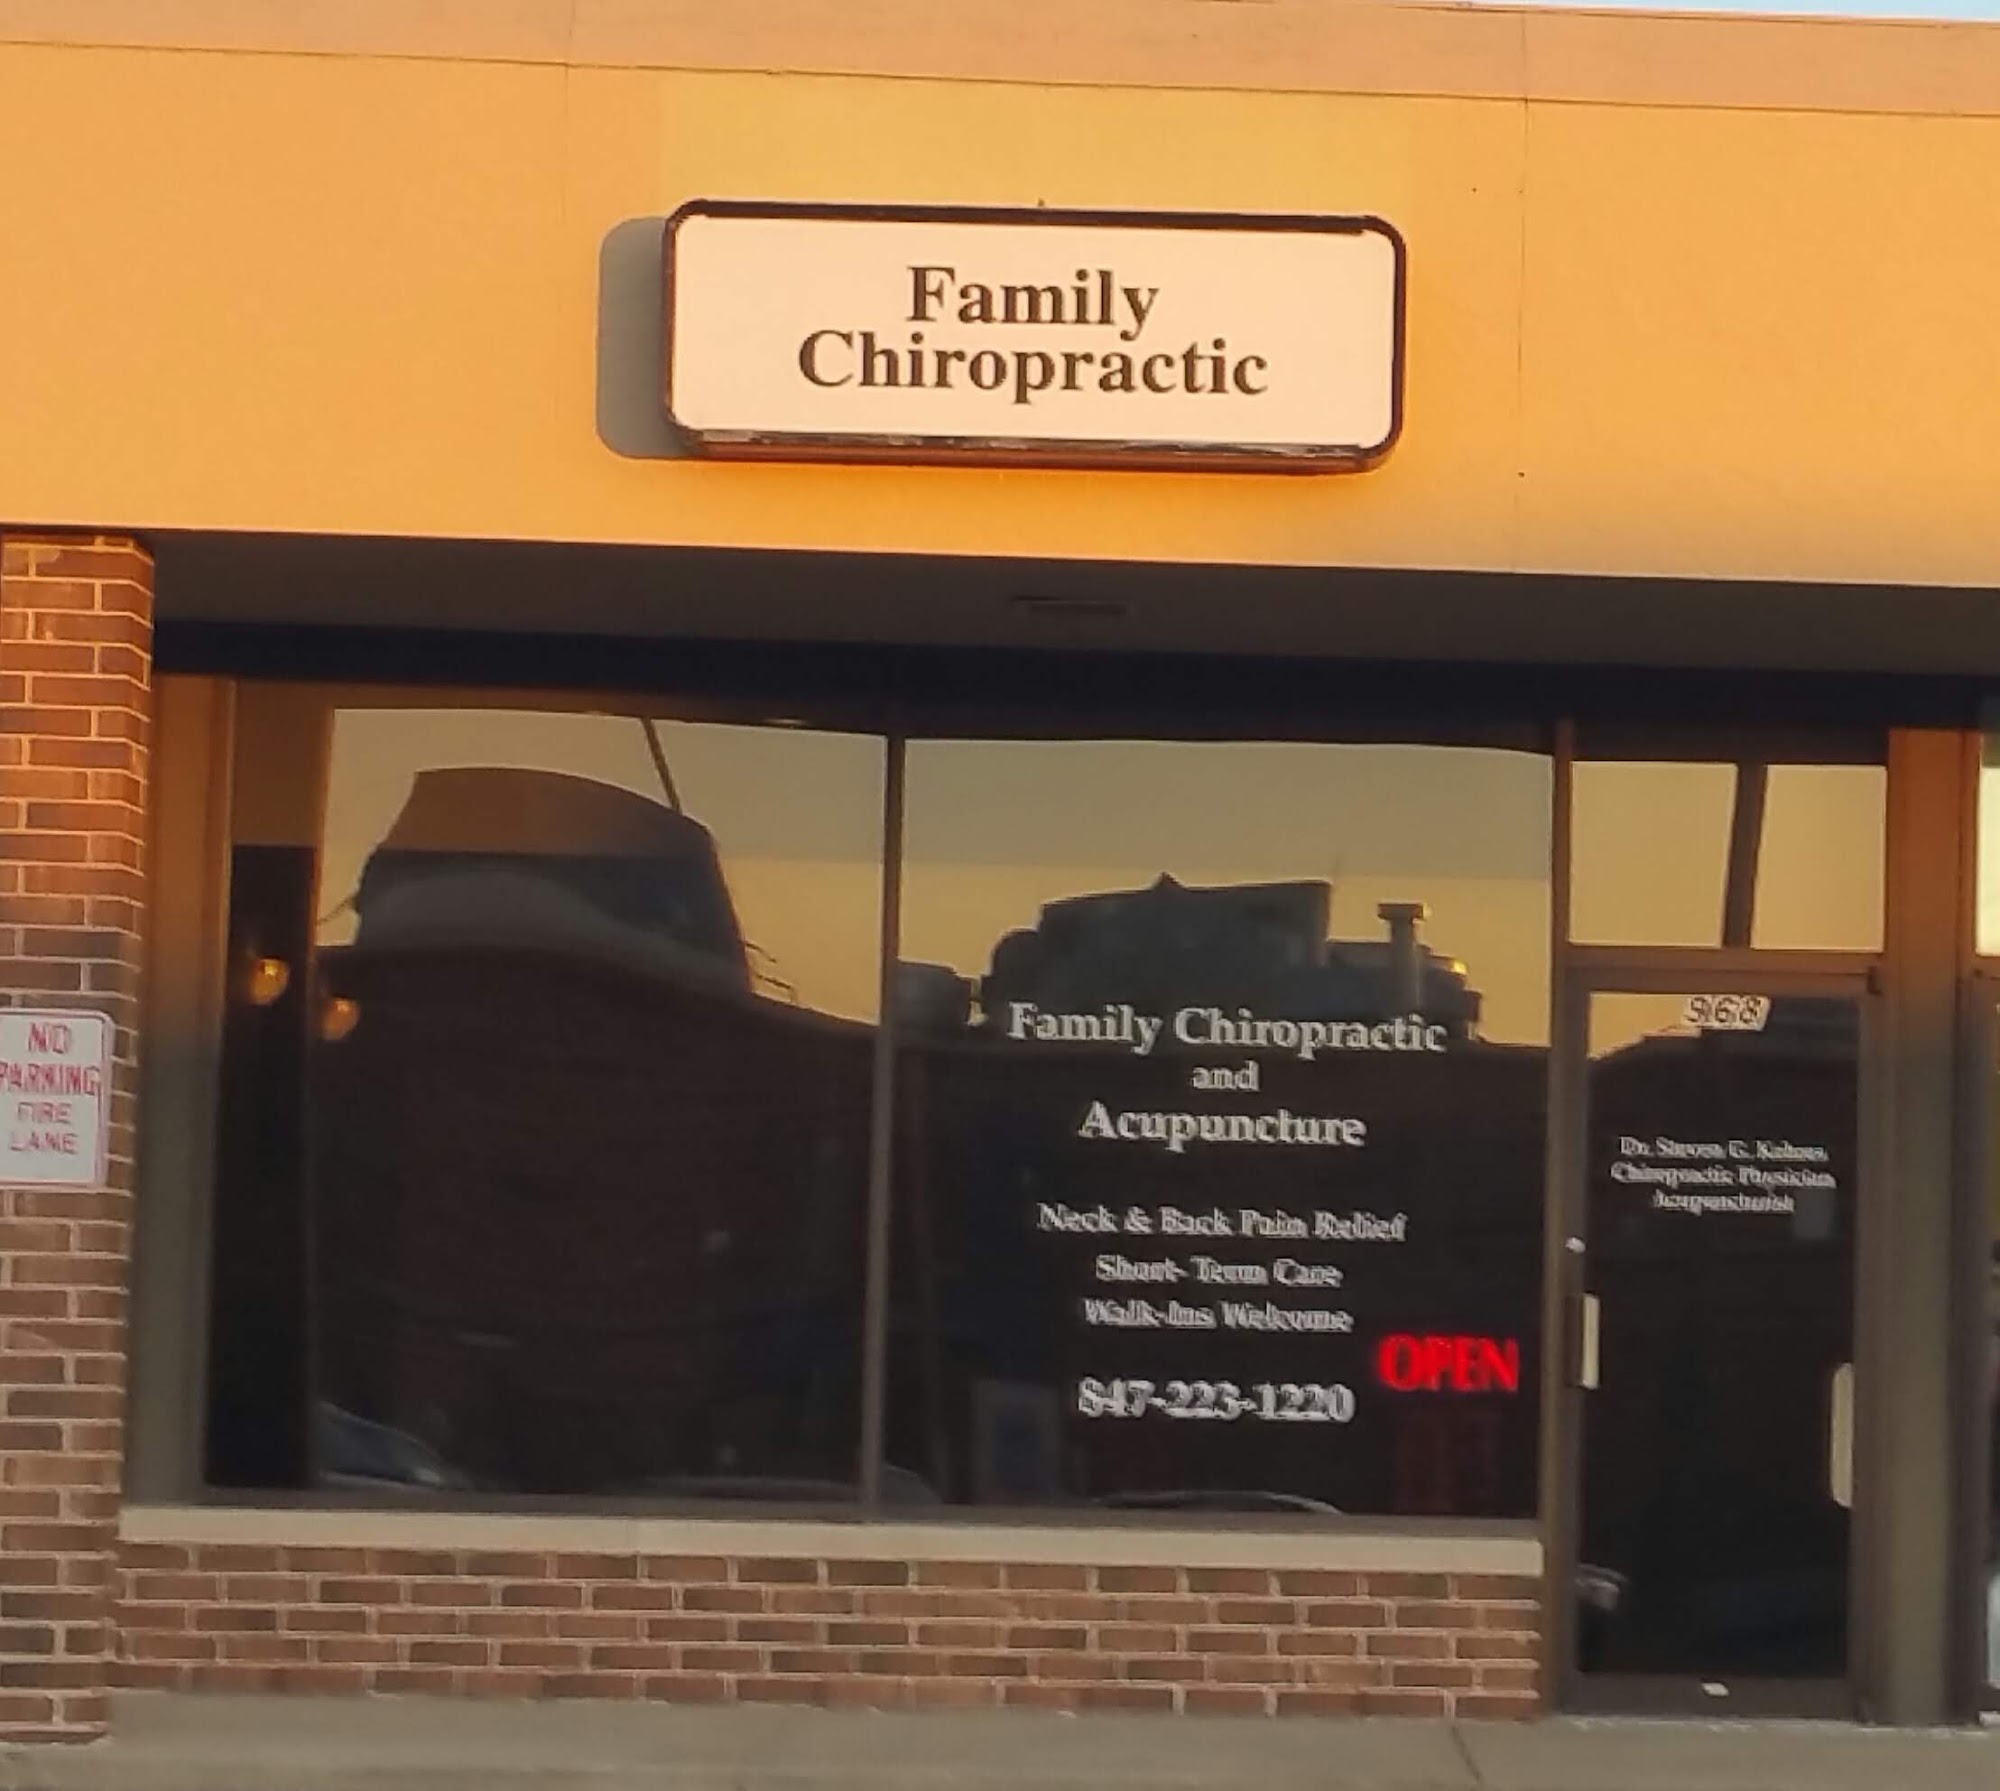 Family Chiropractic 968 E Rollins Rd, Round Lake Beach Illinois 60073